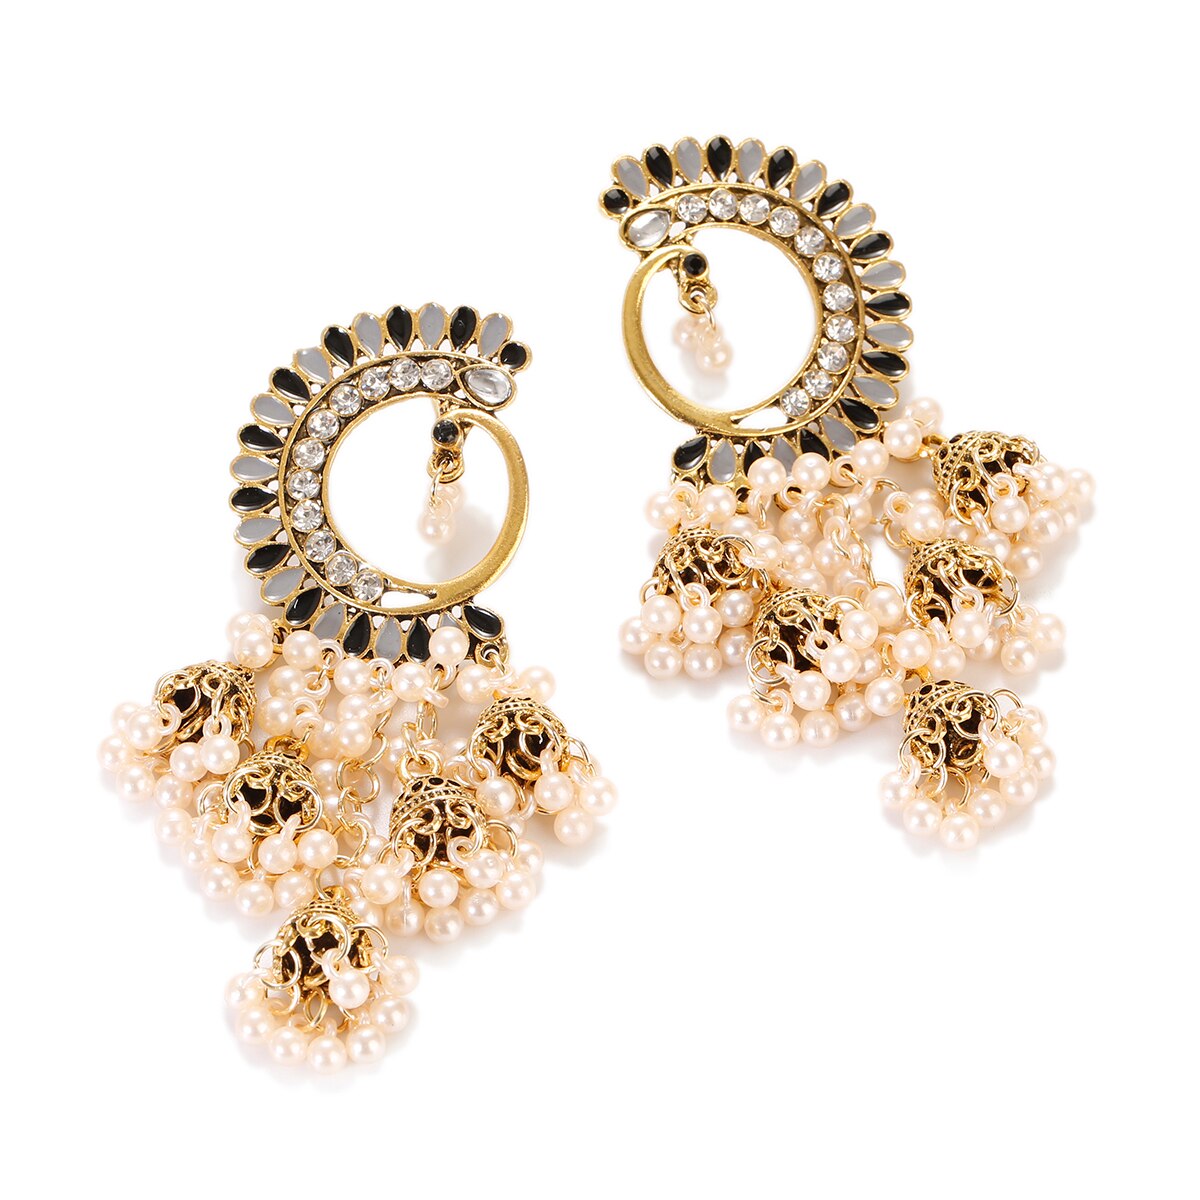 Afghan-Indian-Jewelry-Jhumka-Earrings-For-Women-Gypsy-Gold-Color-Dripping-Oil-Flower-Earrings-Fashio-1005003803870351-3